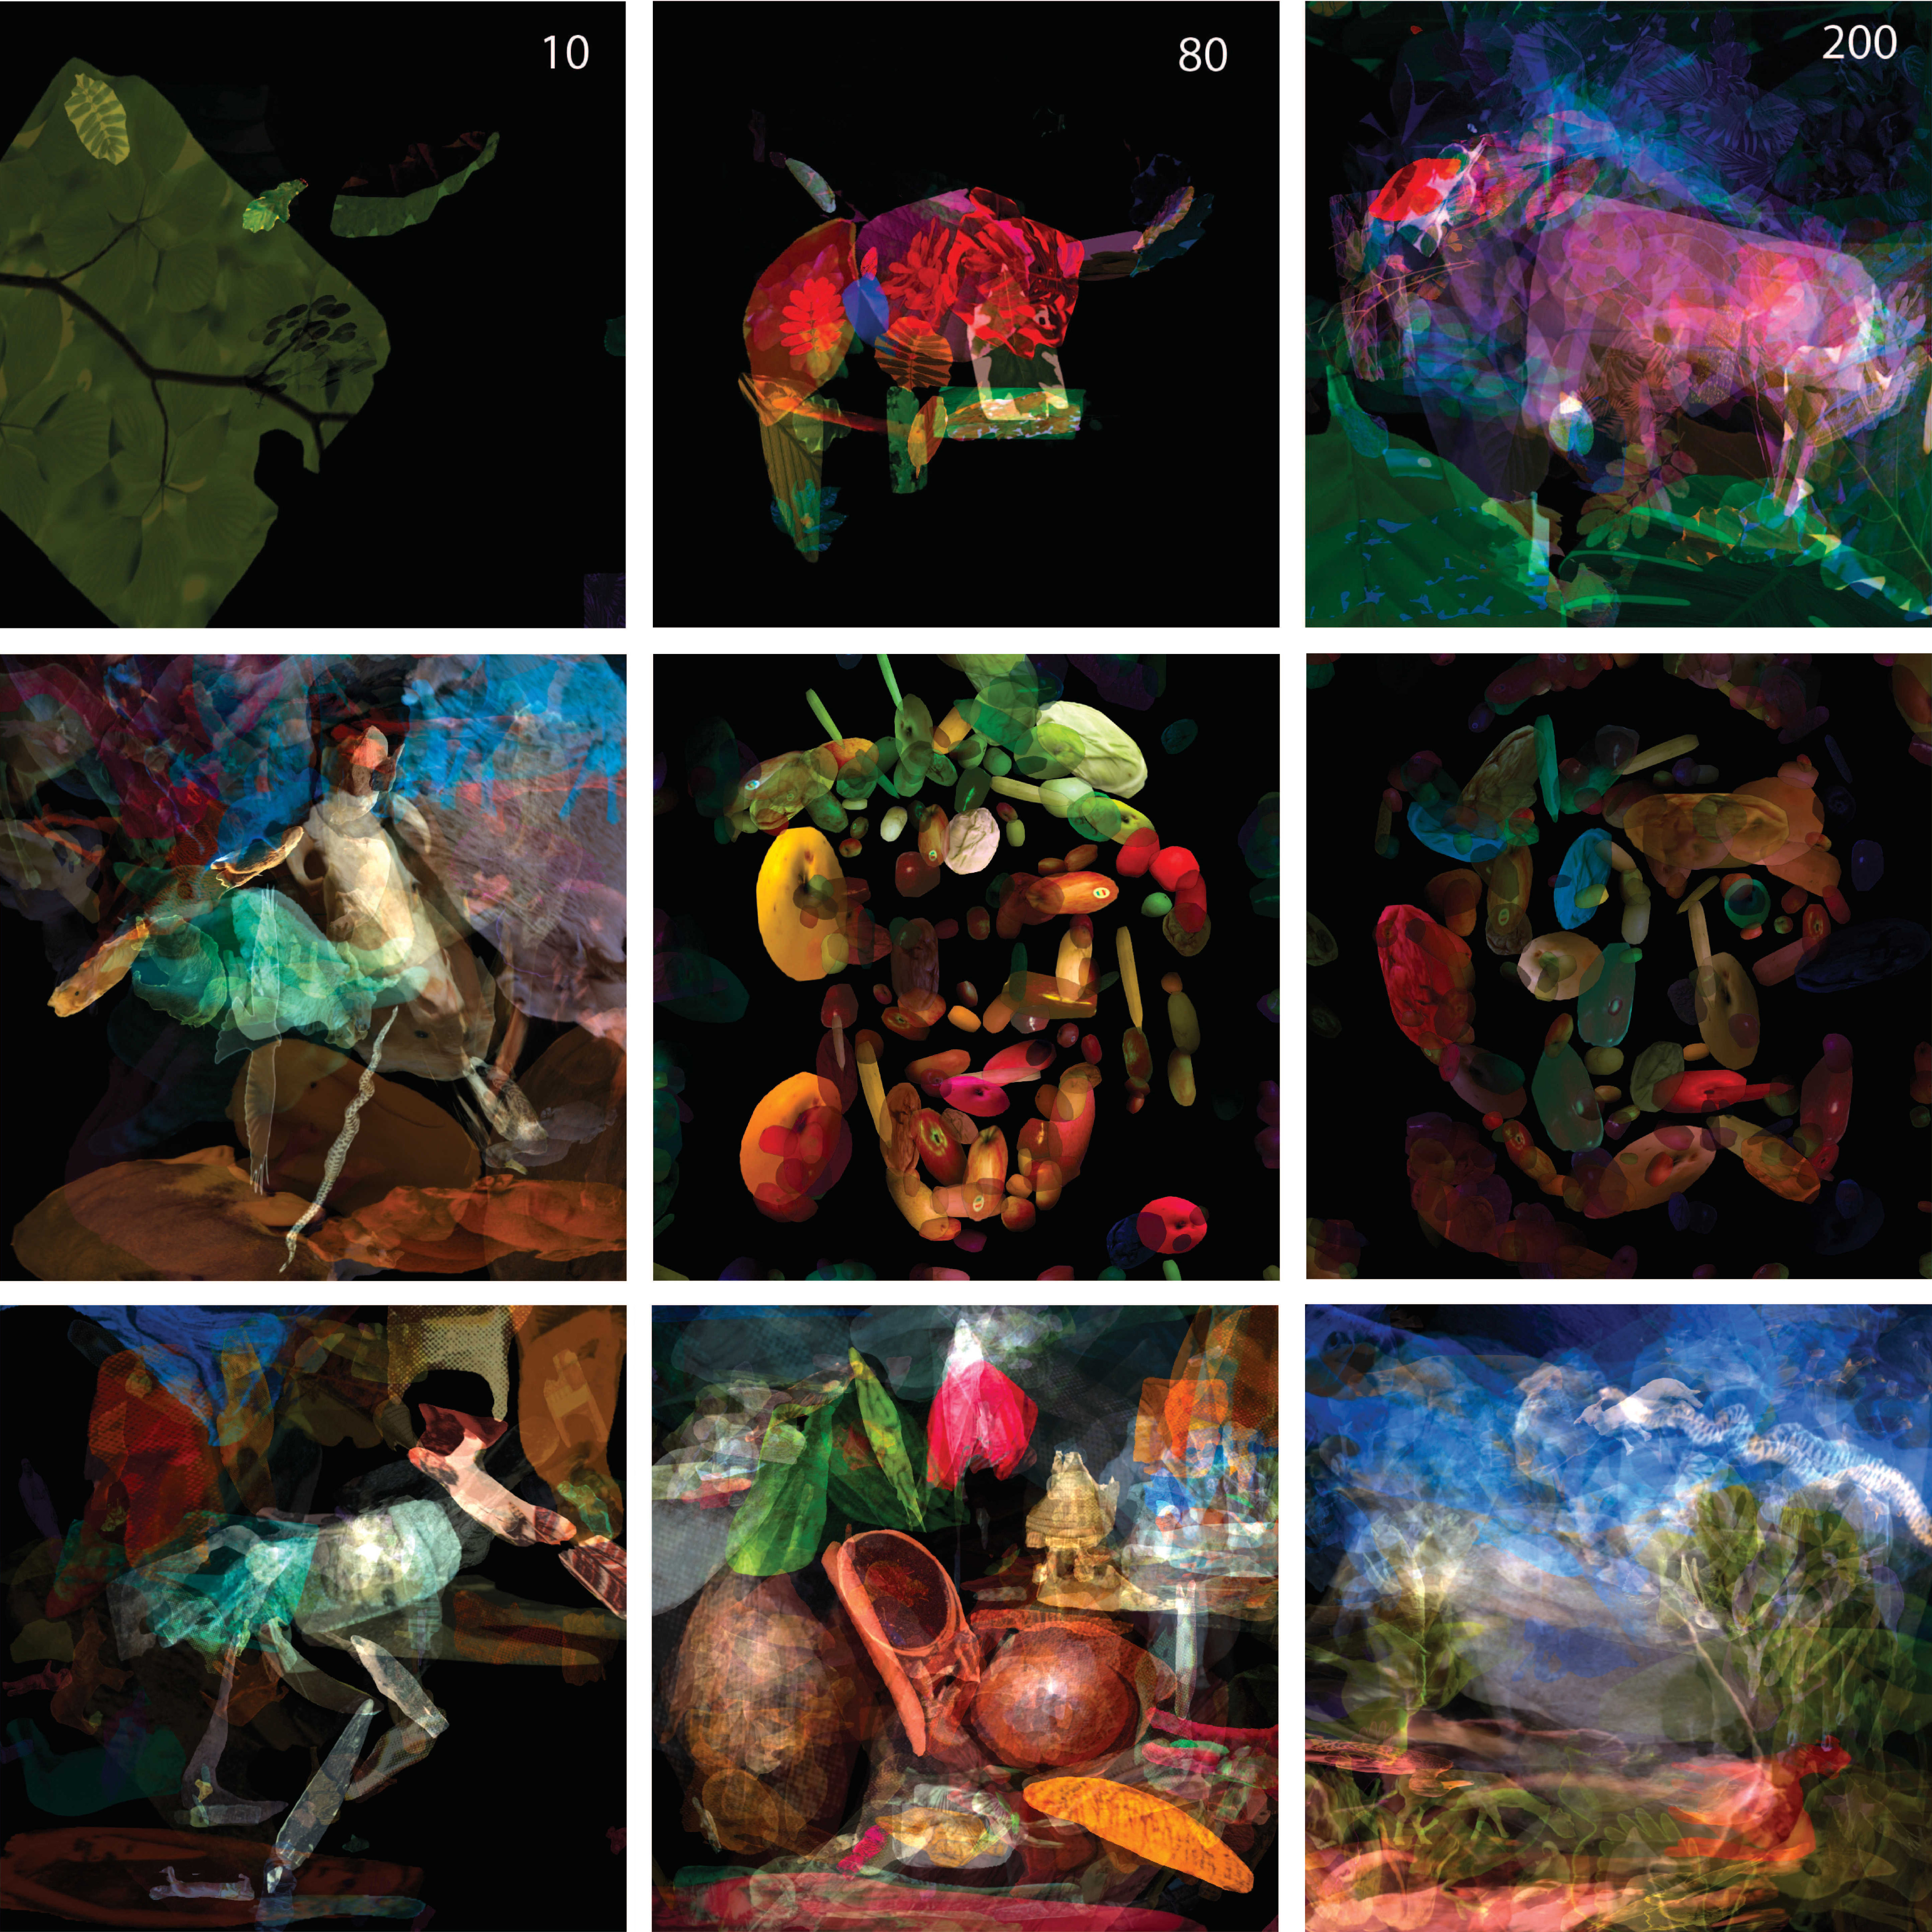 Collages made of different numbers of tree leaves patches (bulls in the top row), as well as Degas-inspired ballet dancers made from animals, faces made of fruit and still life or landscape made from patches of animals.